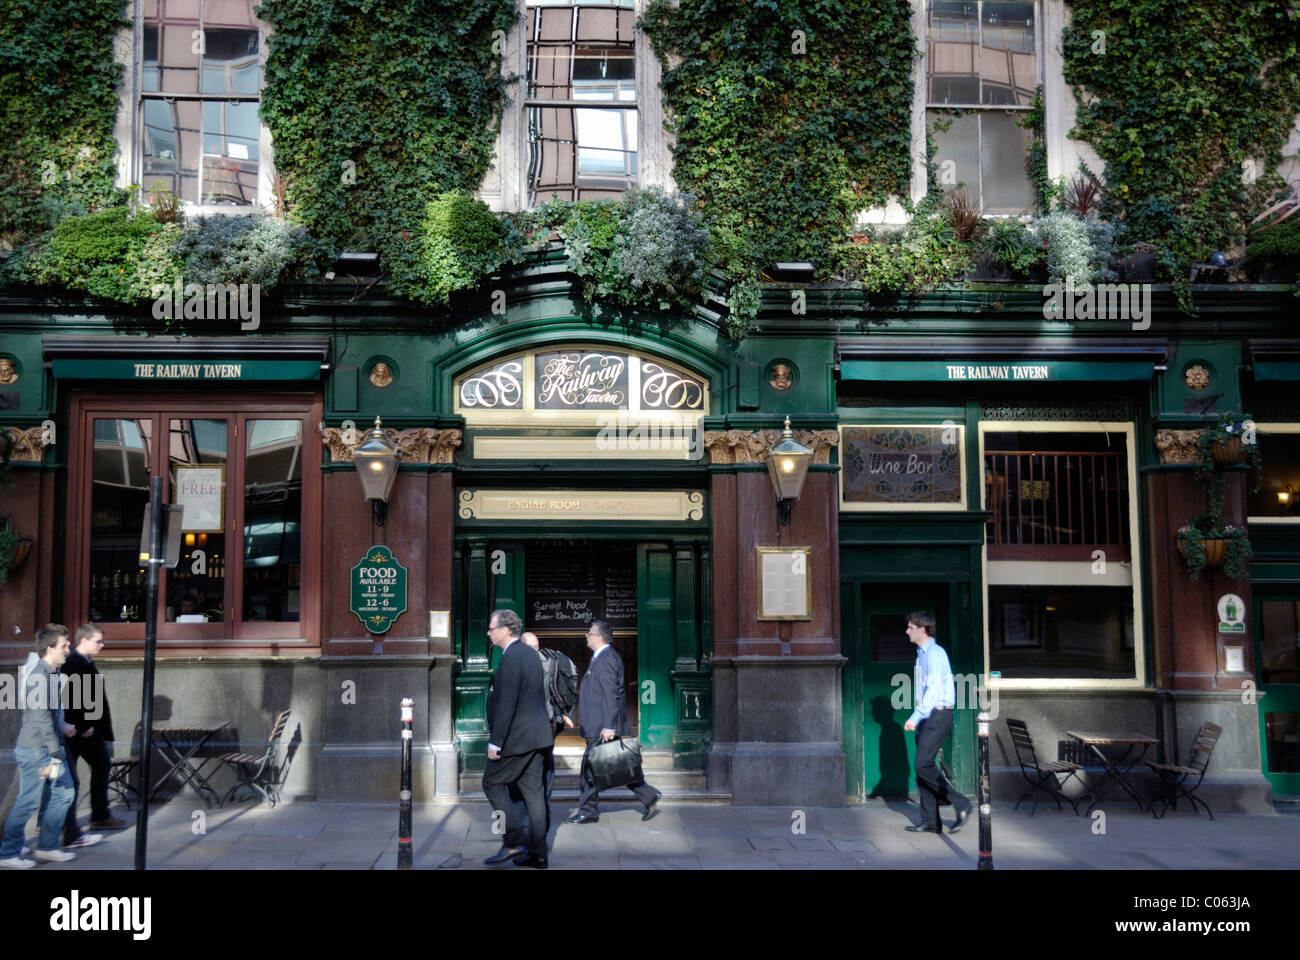 The railway tavern pub london hi-res stock photography and images - Alamy